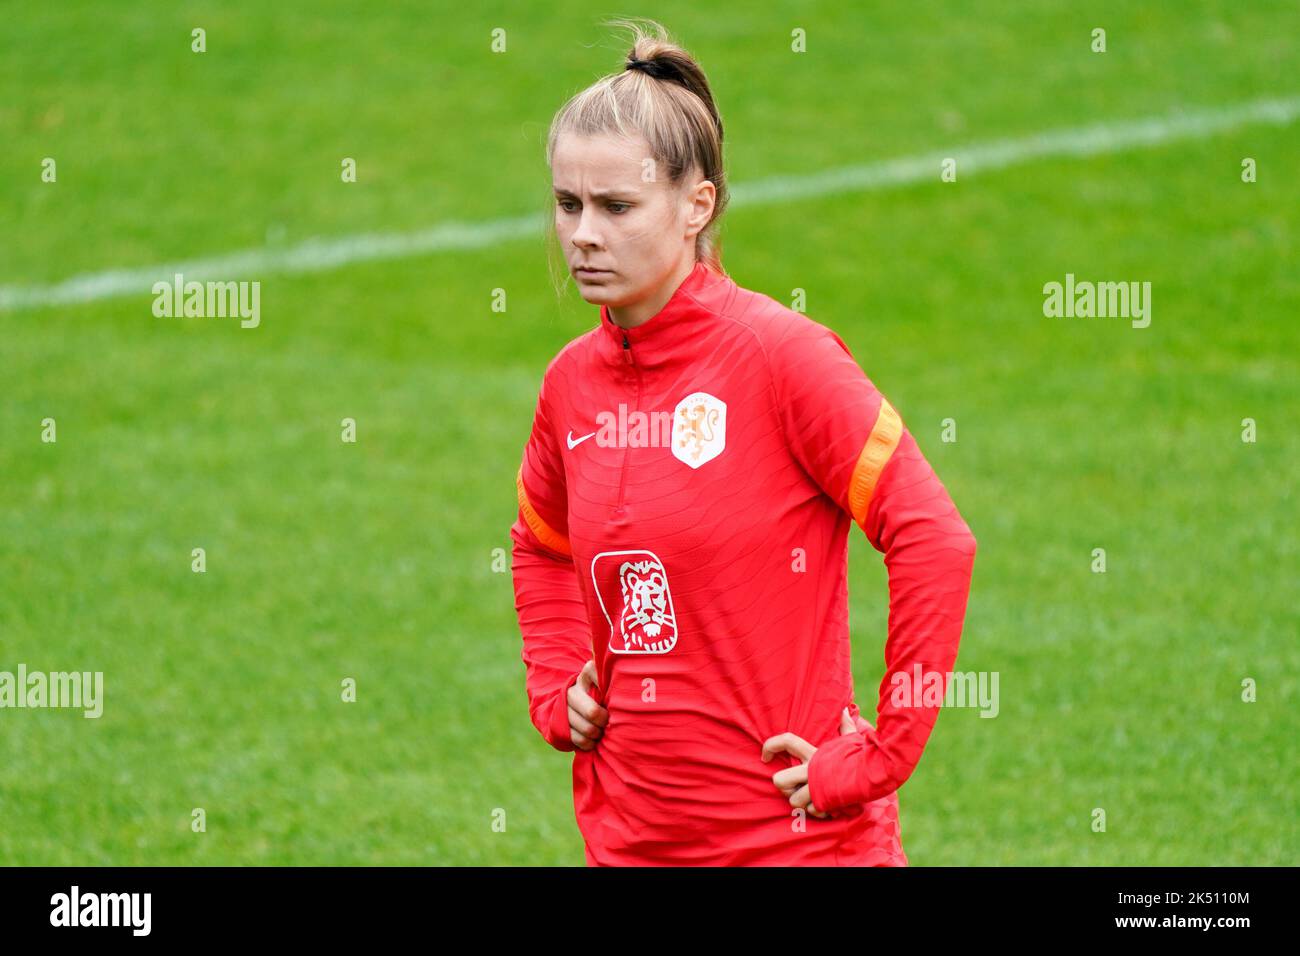 ZEIST, NETHERLANDS - OCTOBER 5: Kerstin Casparij of the Netherlands during a Training Session of the Netherlands Women’s Football Team at the KNVB Campus on October 5, 2022 in Zeist, Netherlands (Photo by Jeroen Meuwsen/Orange Pictures) Stock Photo